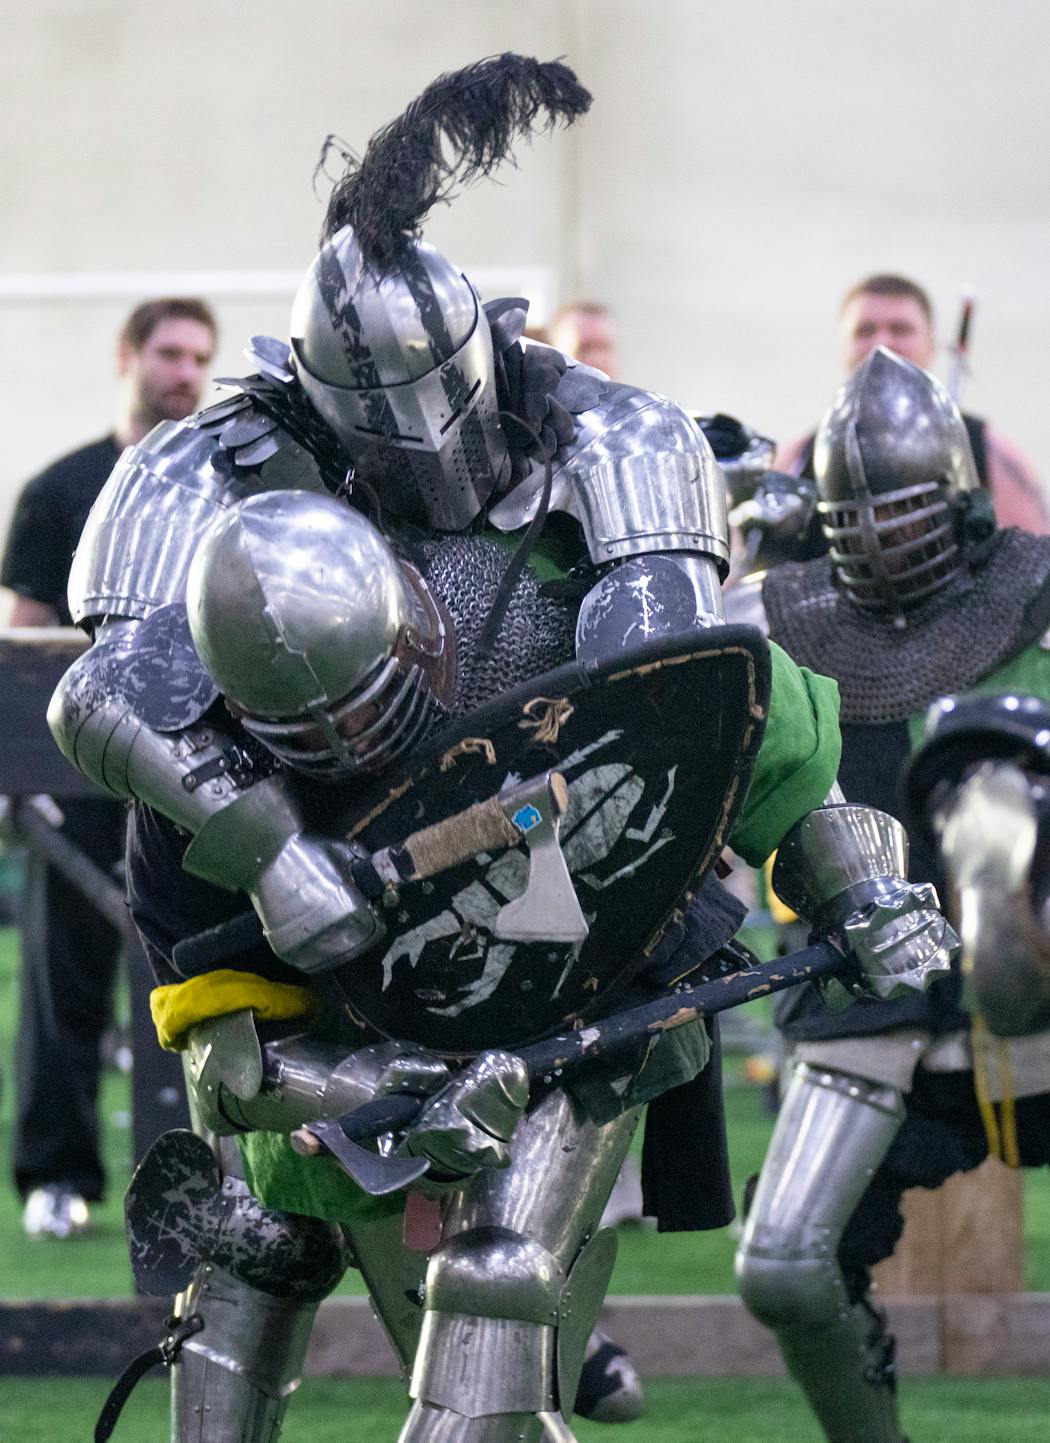 Despite the protection of armor, there were some injuries during the tournament.